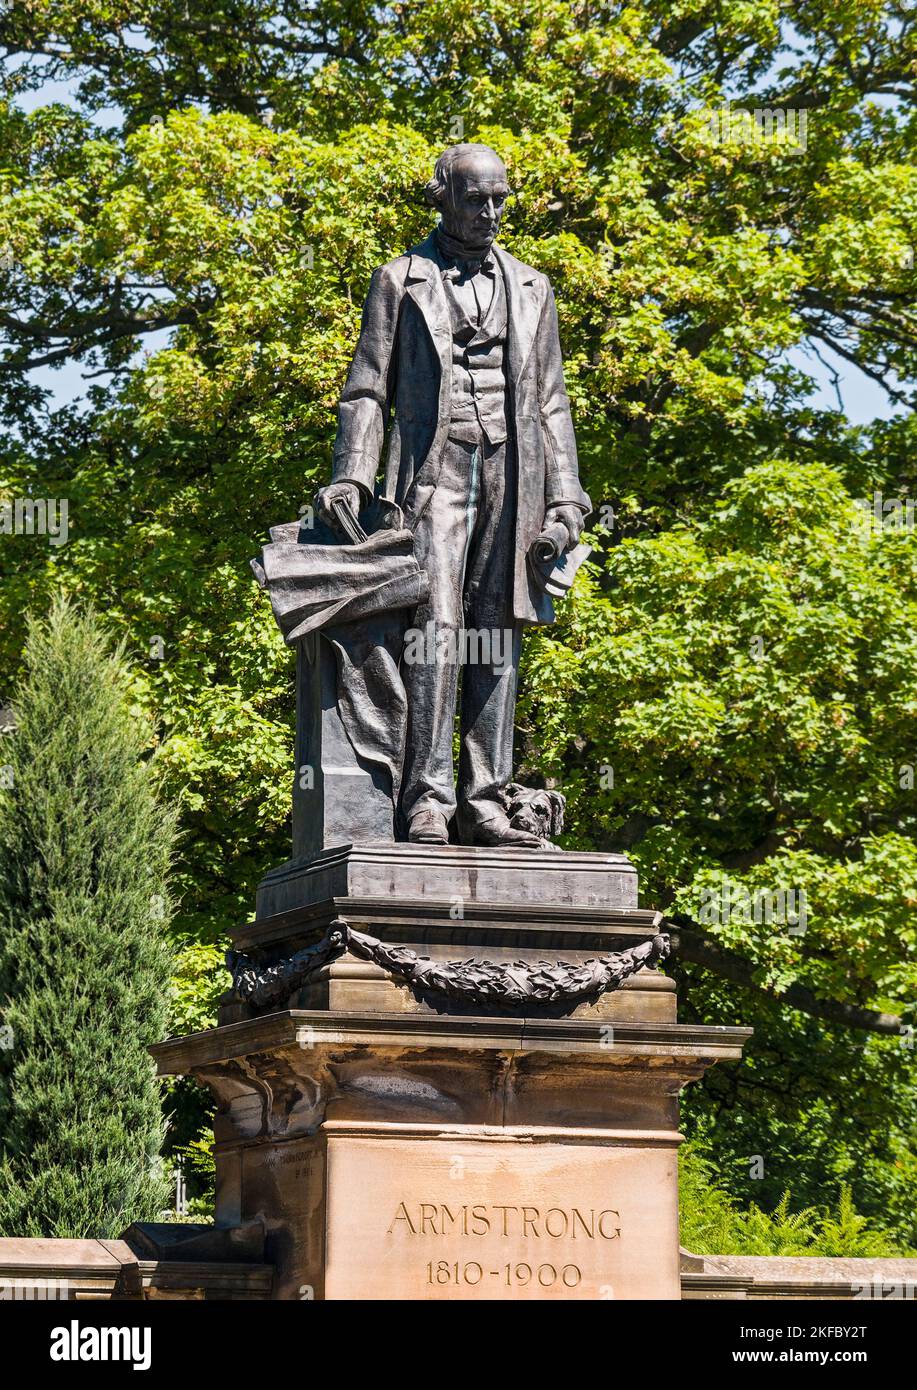 Statue of William George Armstrong at Barras Bridge, Newcastle upon Tyne, UK Stock Photo